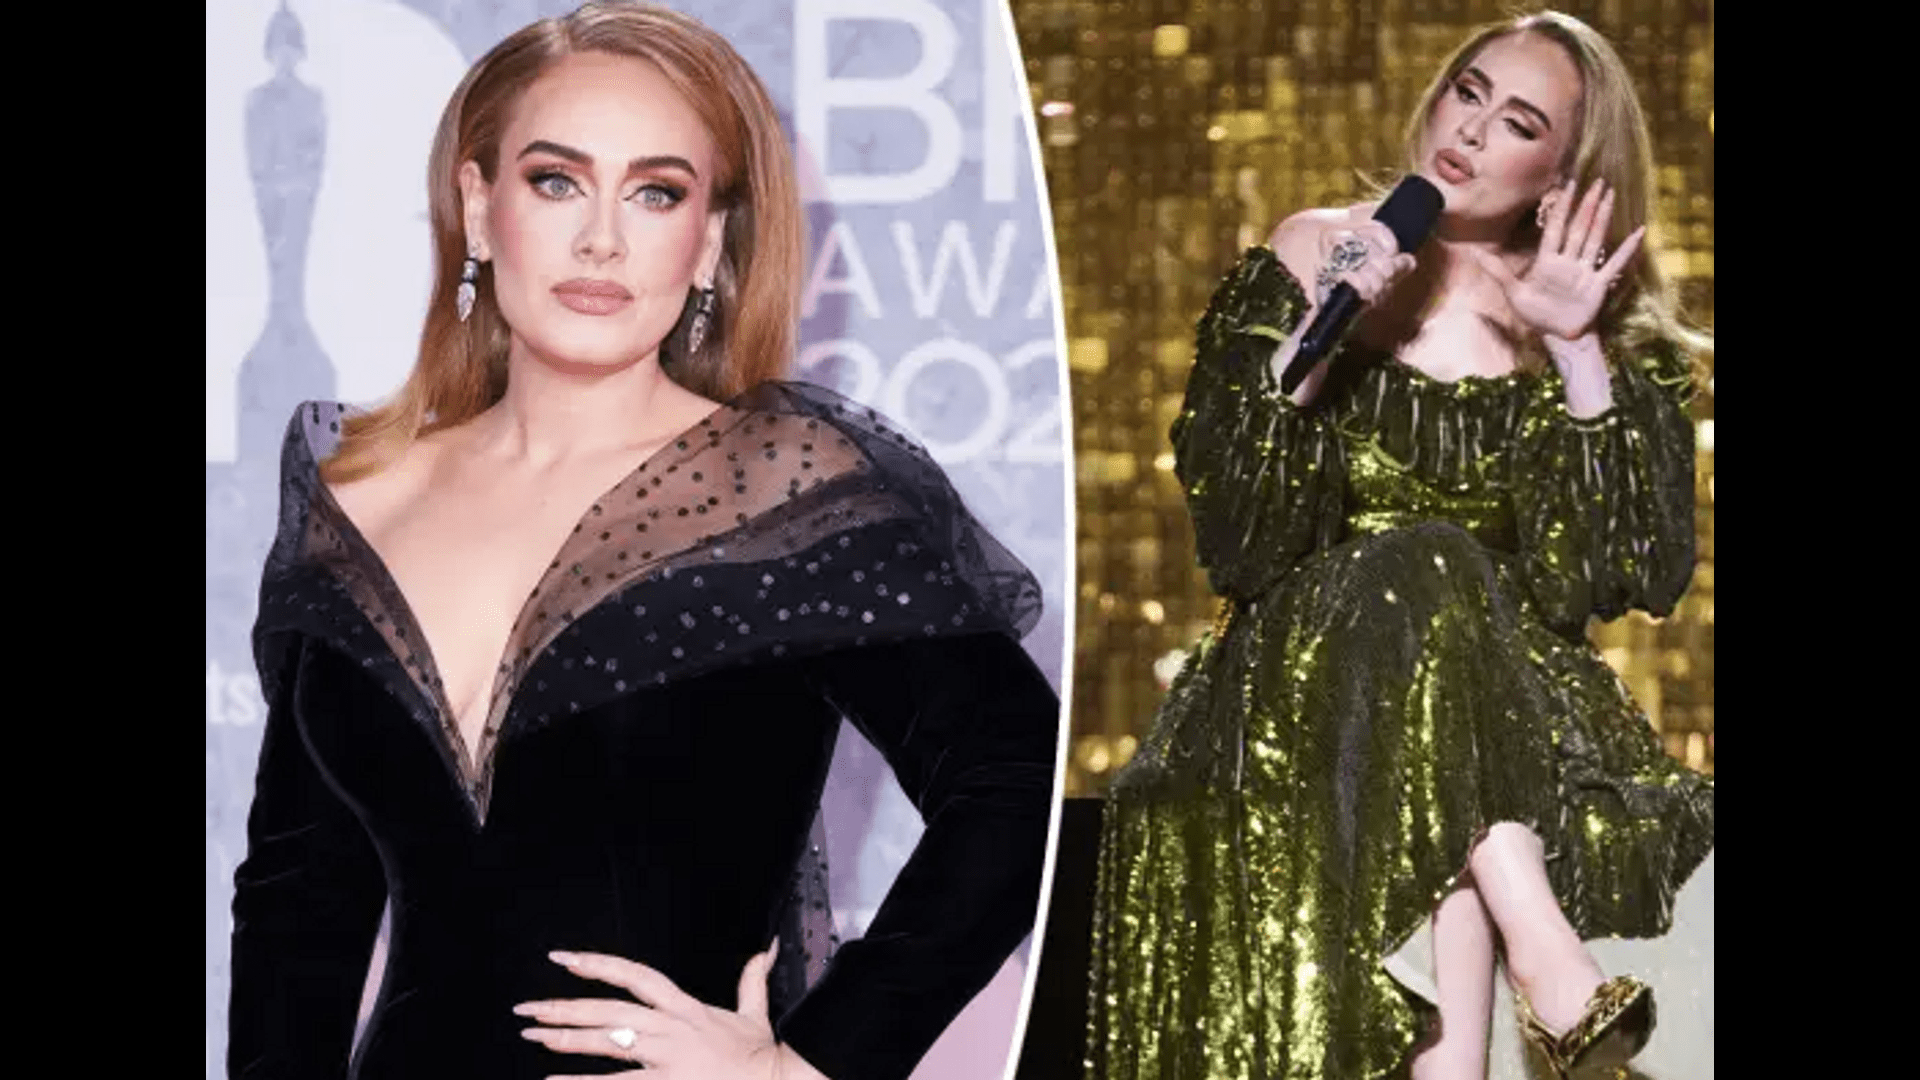 Adele fired the team behind her Las Vegas residence